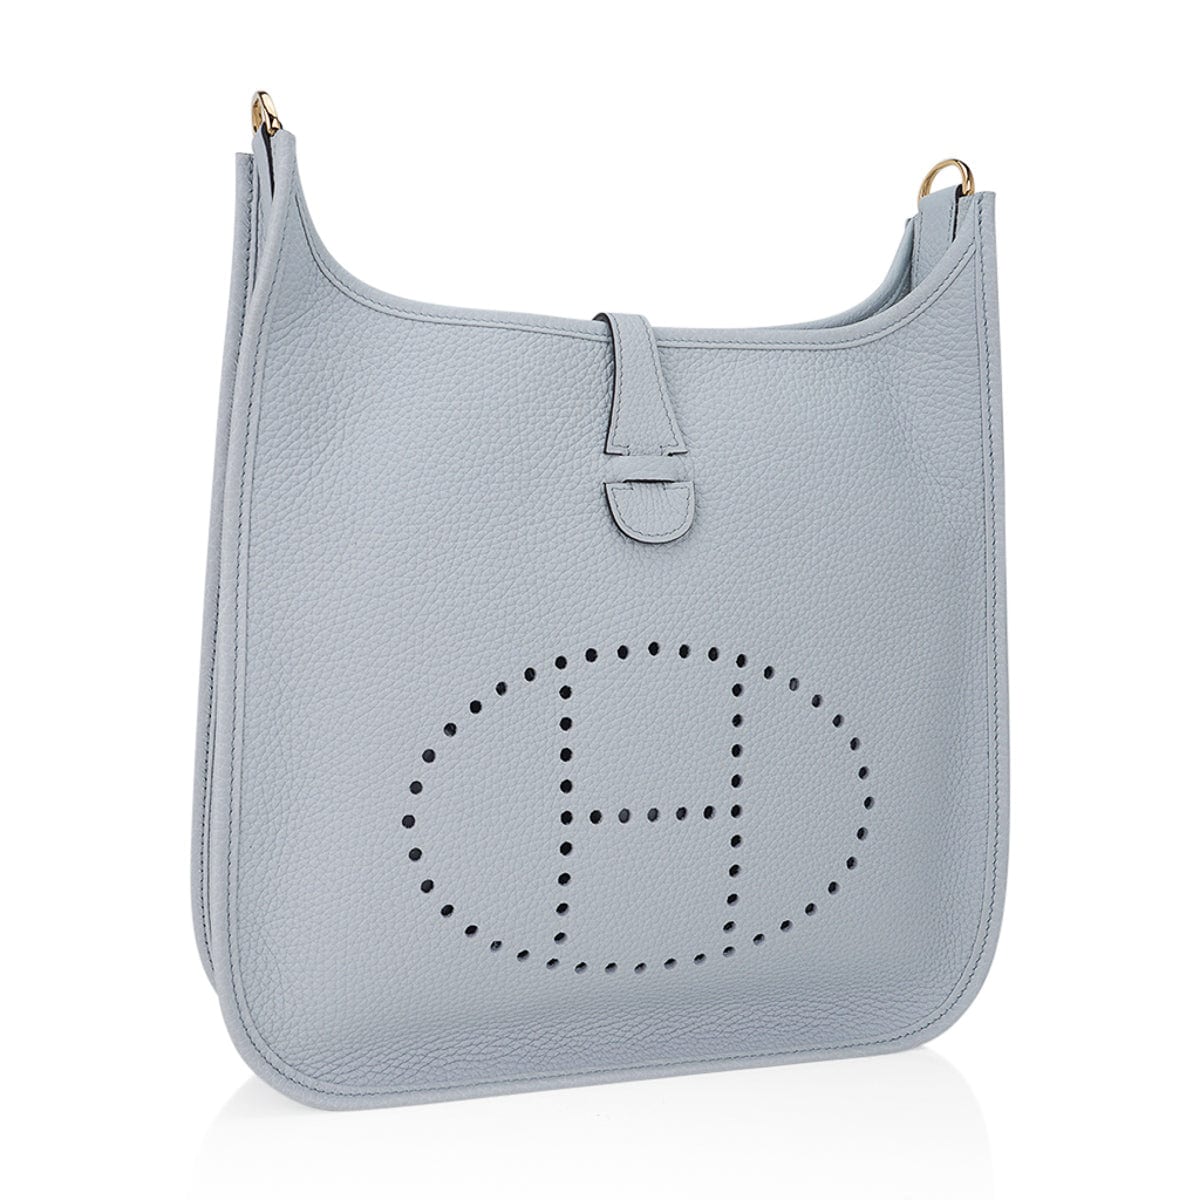 Hermes White Clemence Evelyne II PM | Sold Out Color at Hermes! Retail  $3300!